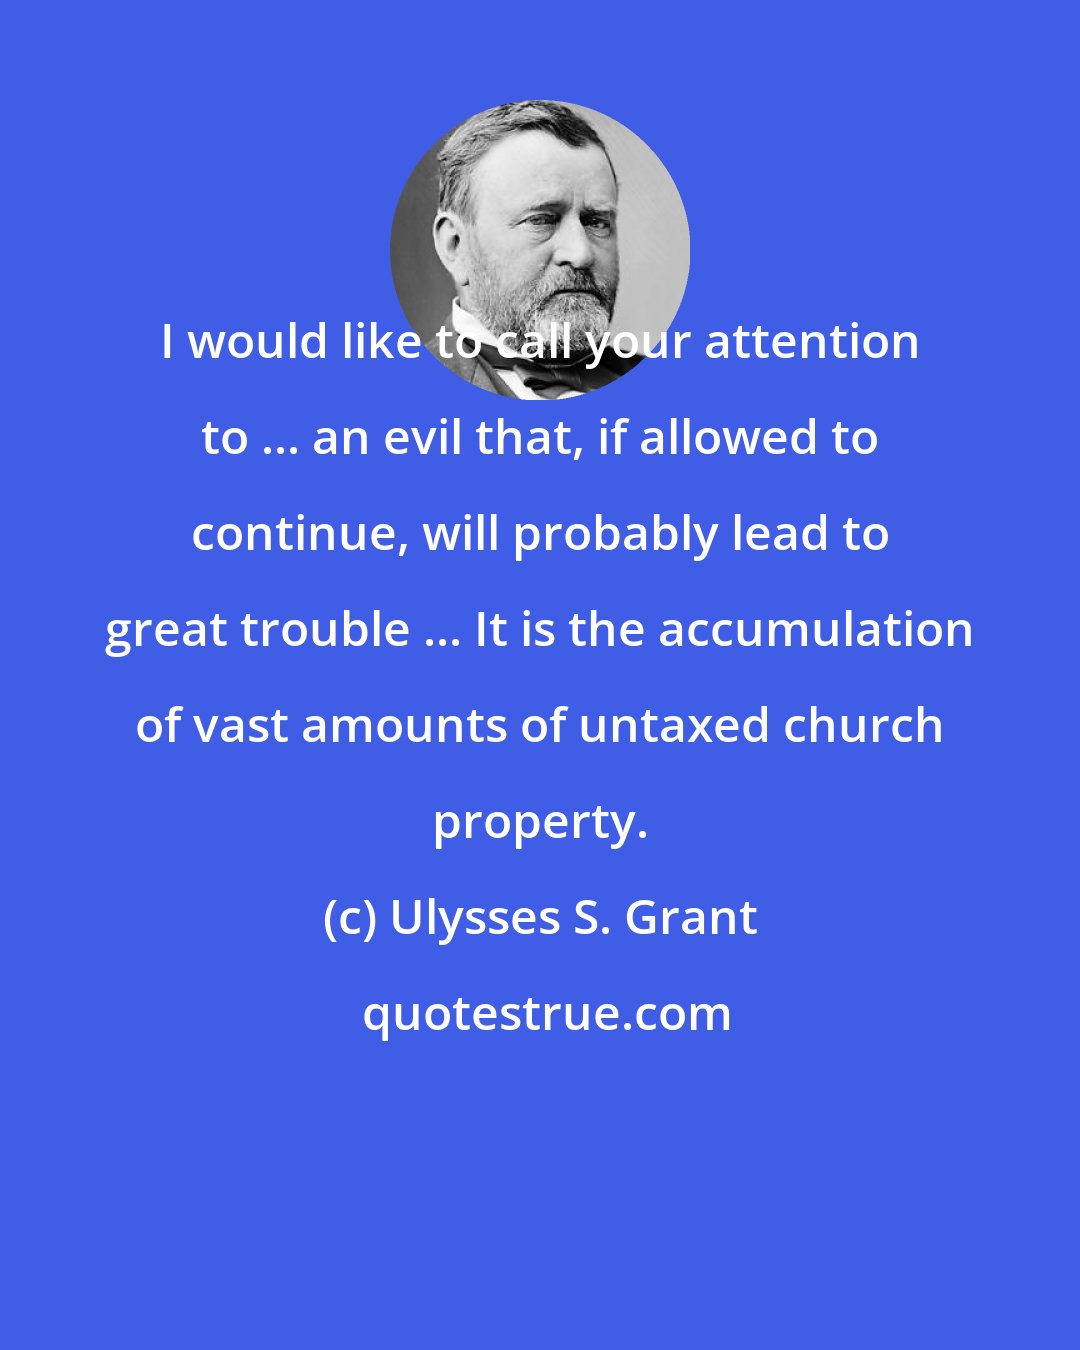 Ulysses S. Grant: I would like to call your attention to ... an evil that, if allowed to continue, will probably lead to great trouble ... It is the accumulation of vast amounts of untaxed church property.